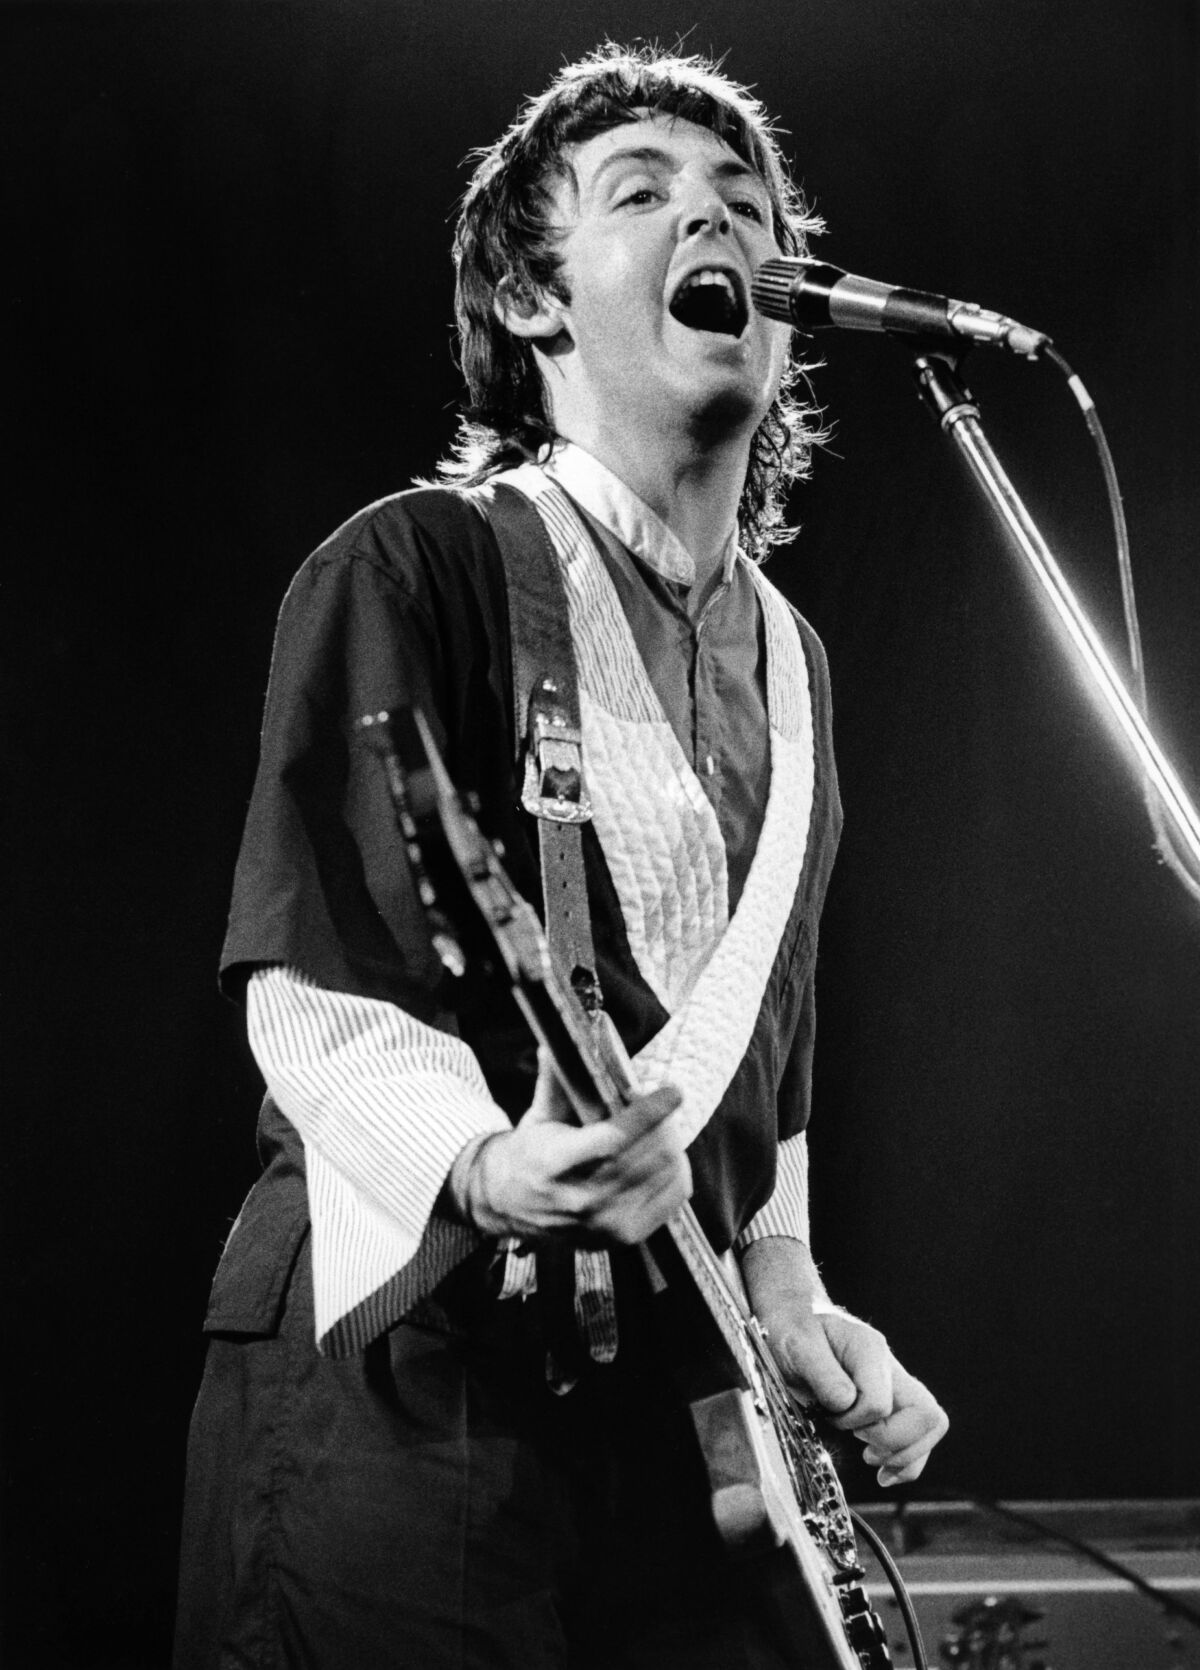 Paul McCartney plays bass as he performs with Wings.